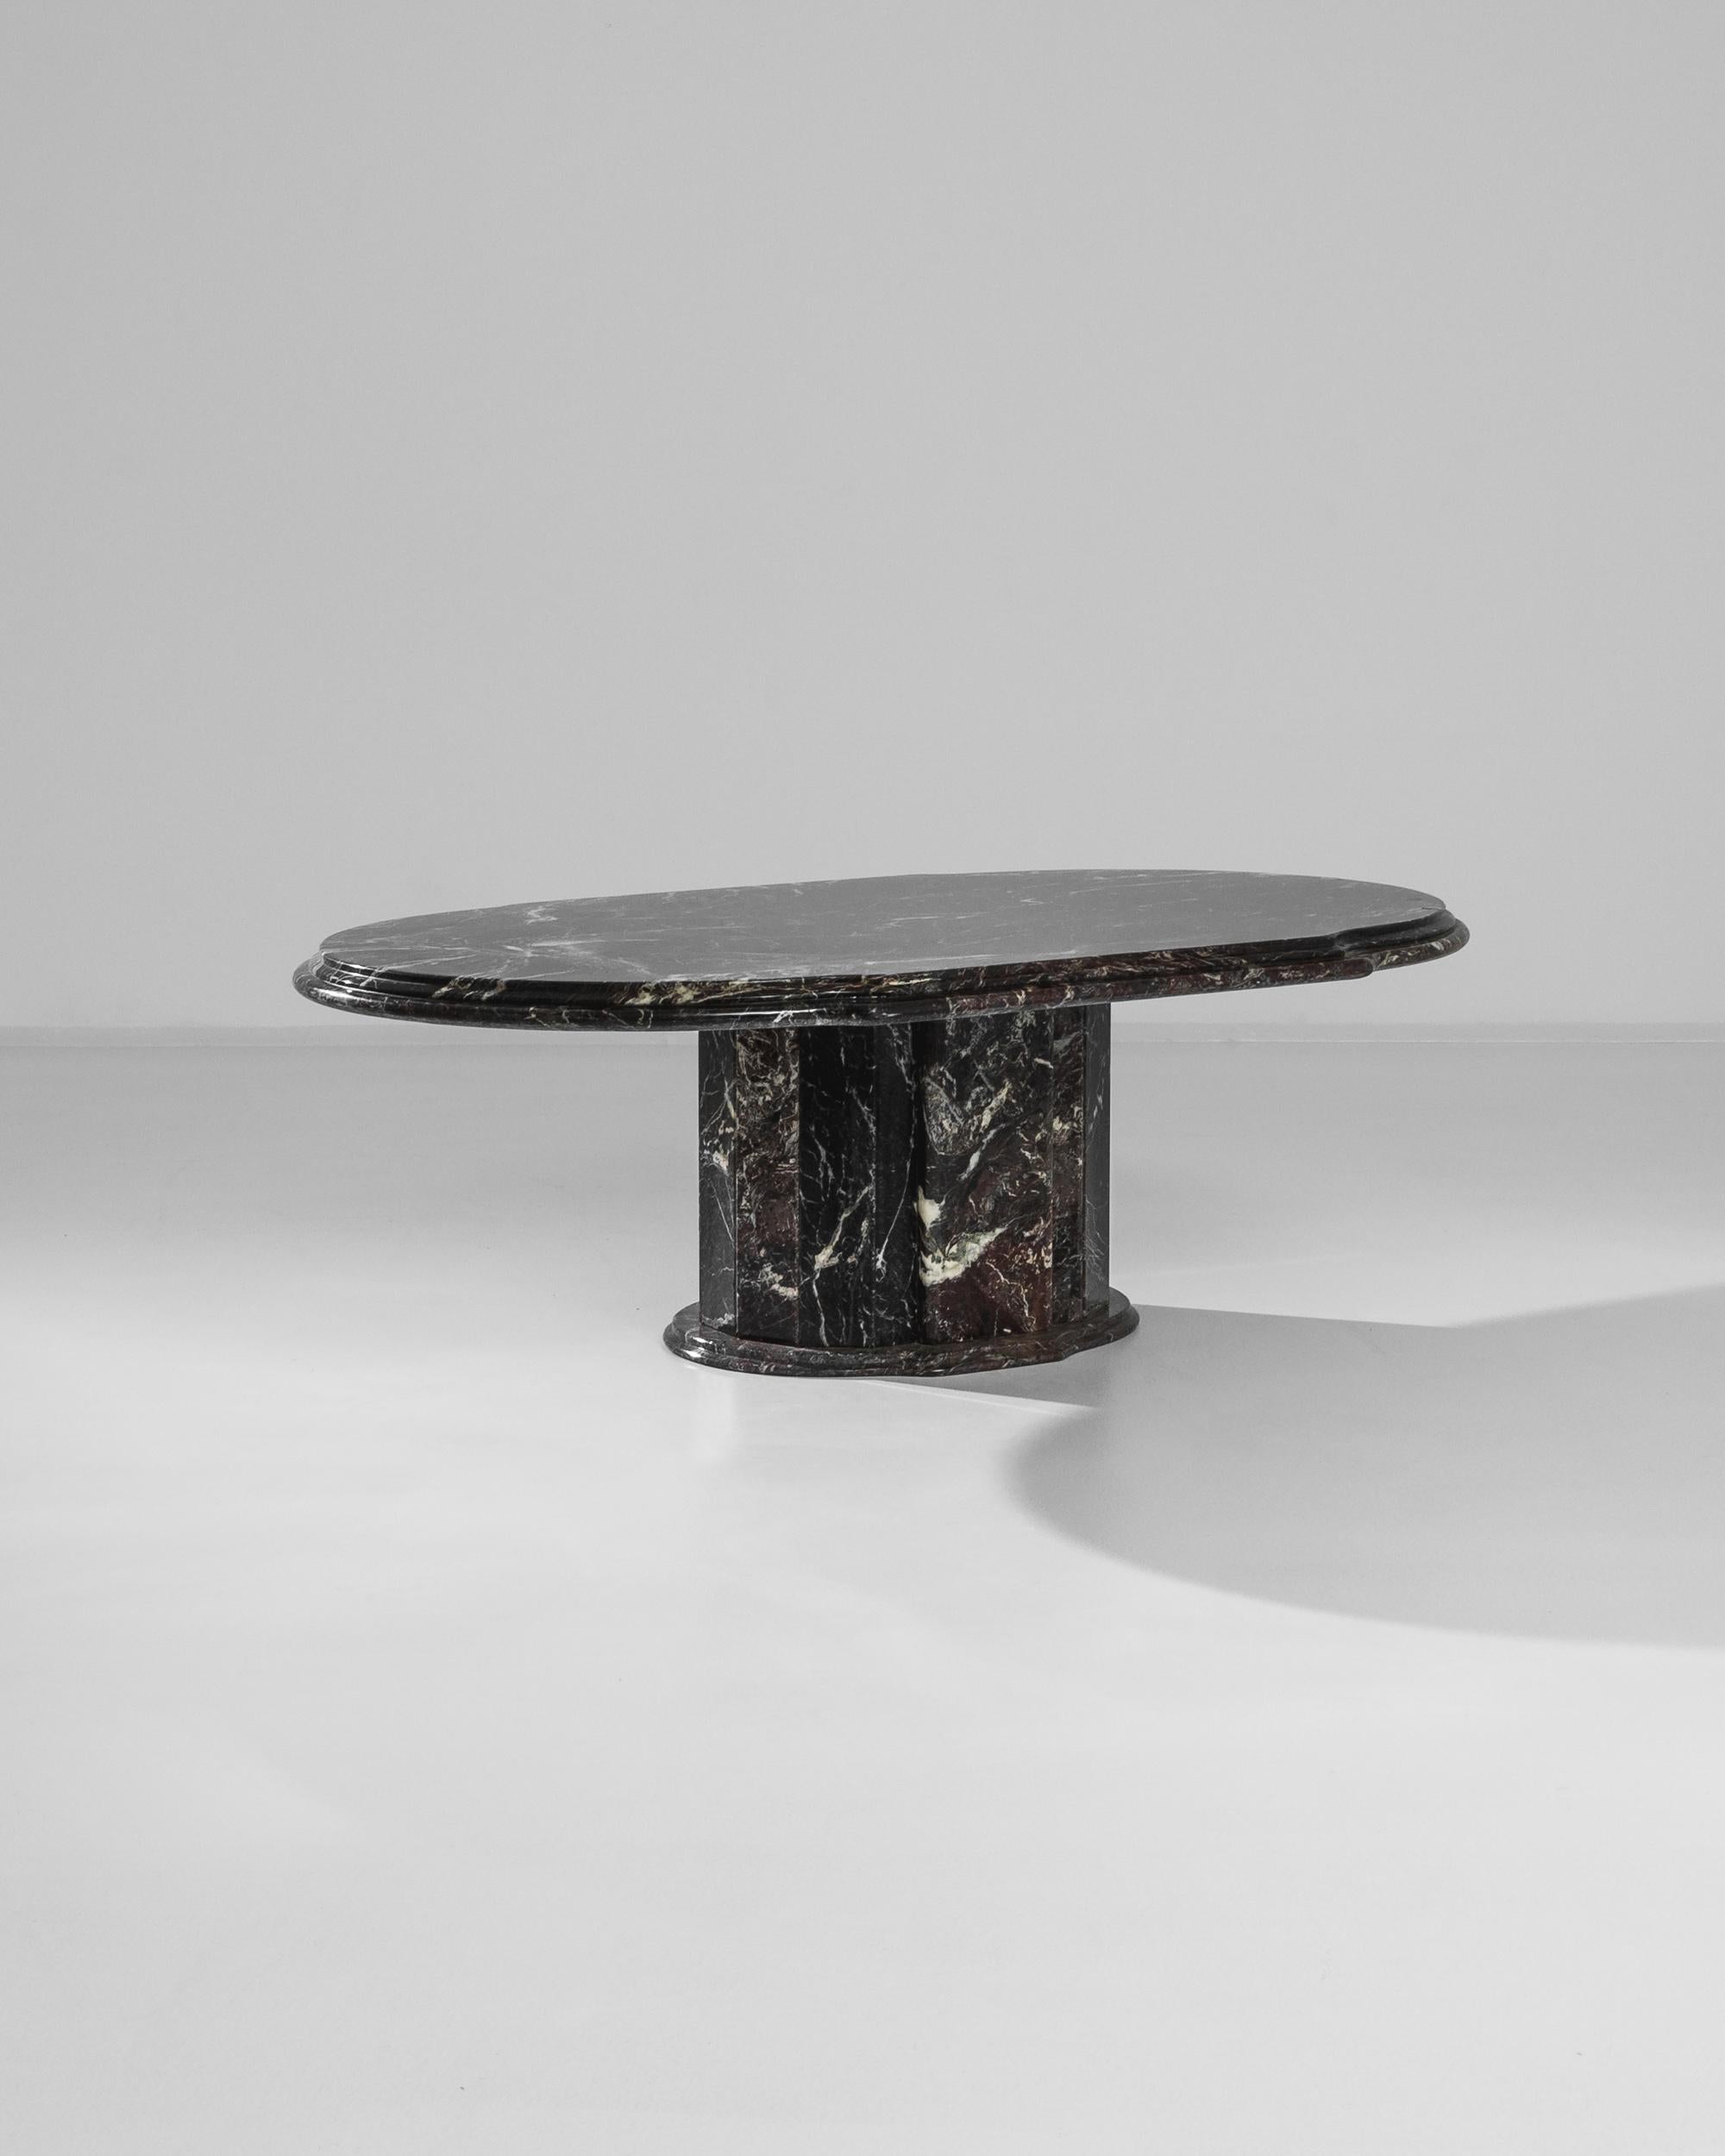 An Italian 1970s large black marble coffee table. Minimal and confident in its construction, yet detailed in its natural patterning, this coffee table exudes a palpable regality. Stria of white and gray run through the stone, offering an exciting